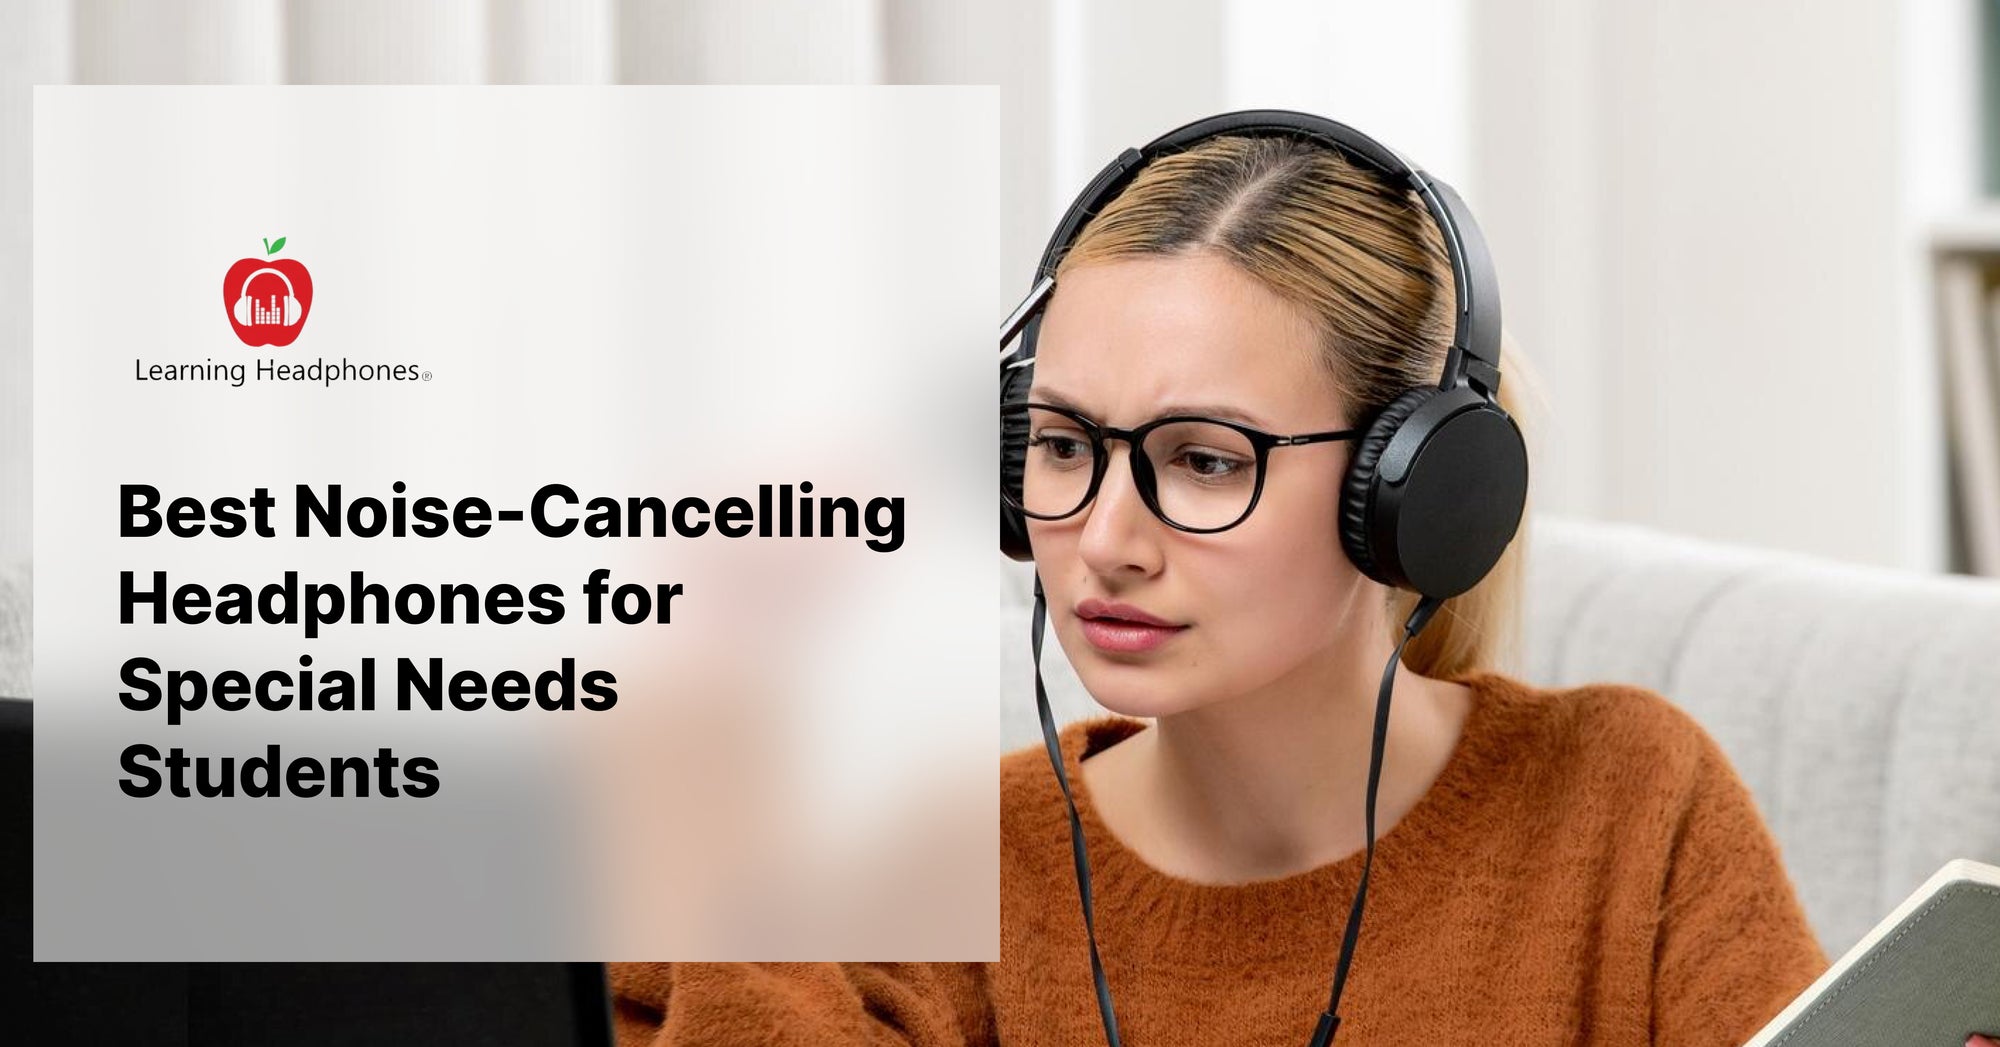  Best Noise-Cancelling Headphones for Special Needs Students